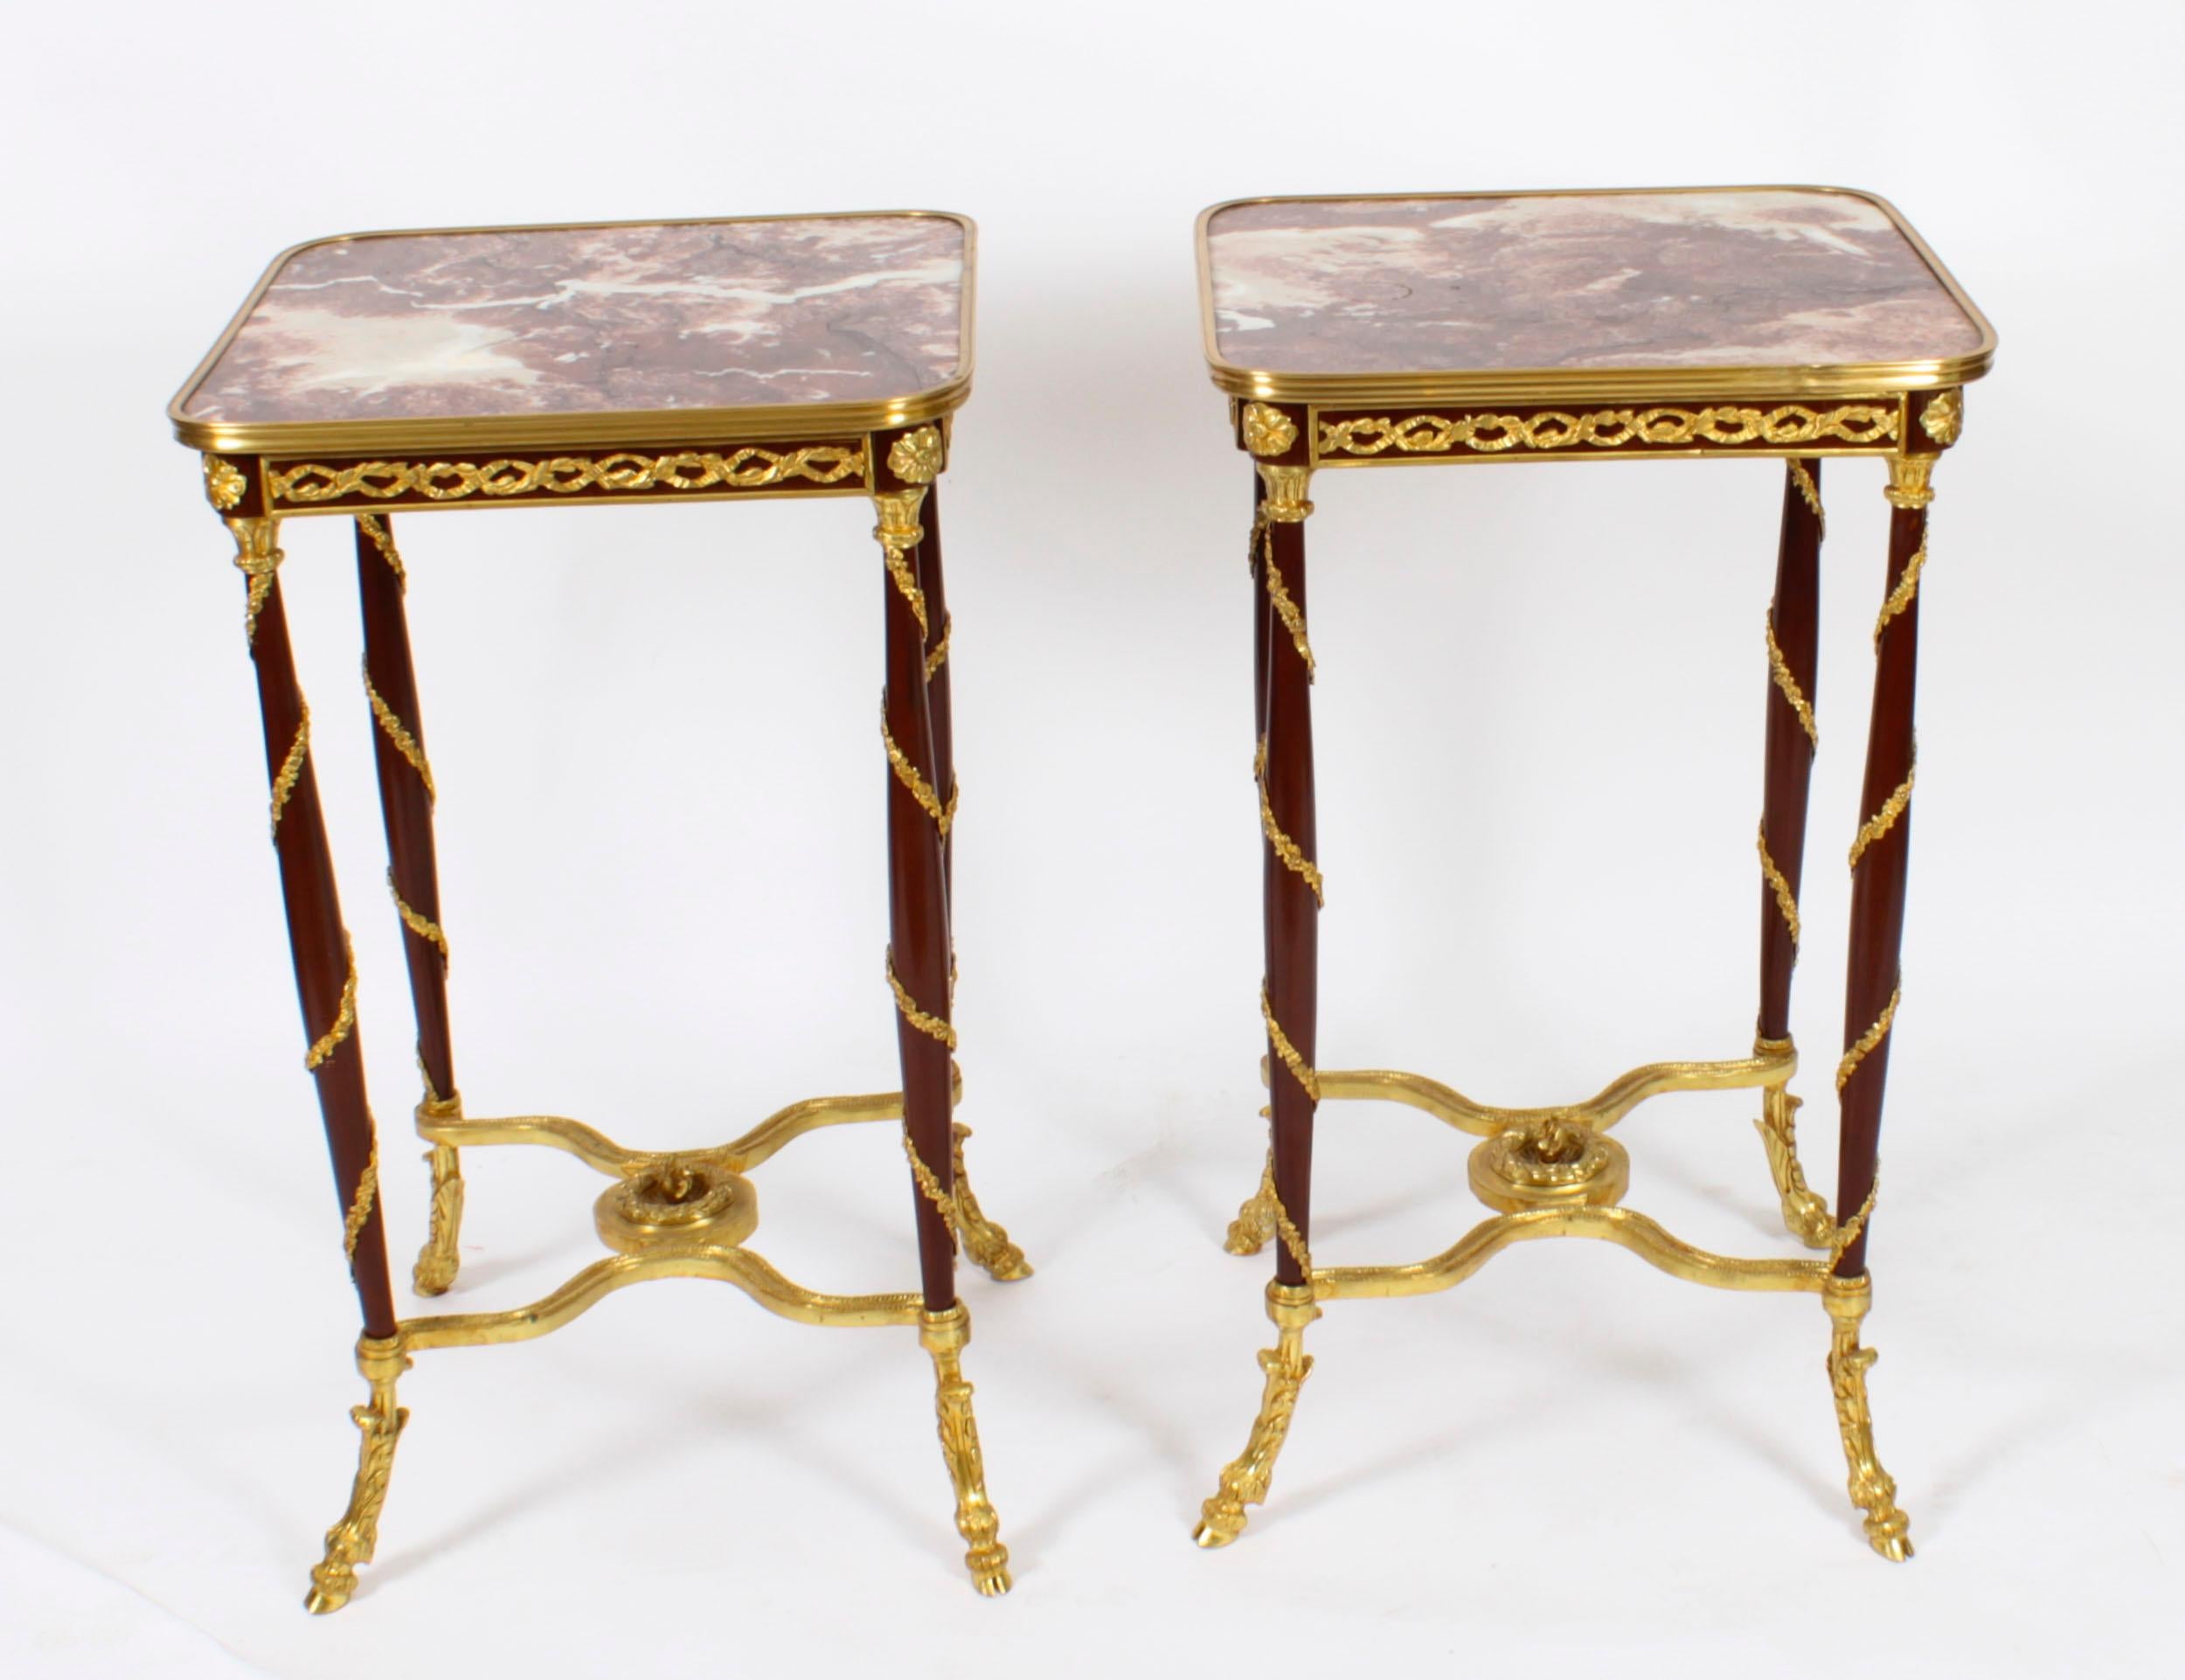 This is a beautiful pair of vintage French Louis Revival ormolu mounted side tables, mid-20th century in date.

The square shaped 